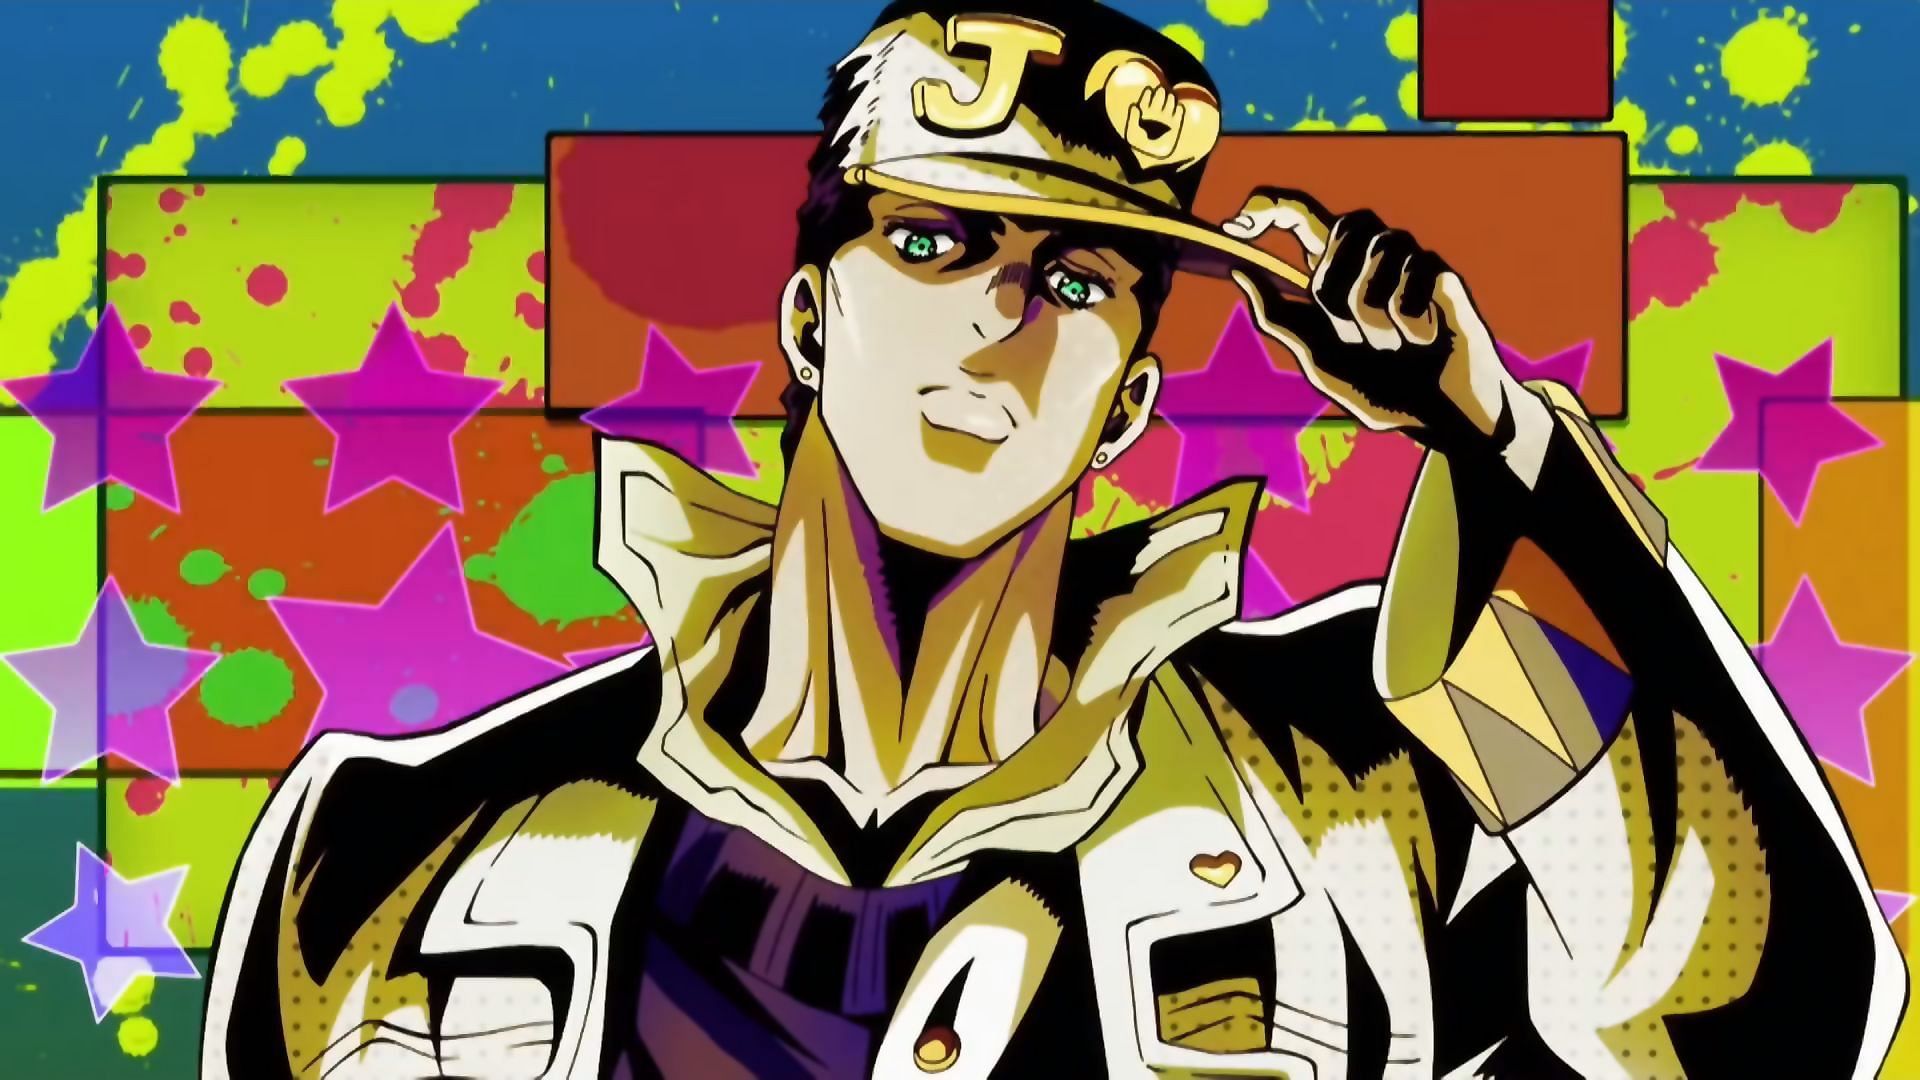 Is JoJoLands going to feature Jotaro Kujo anytime soon? (Image via David Productions).